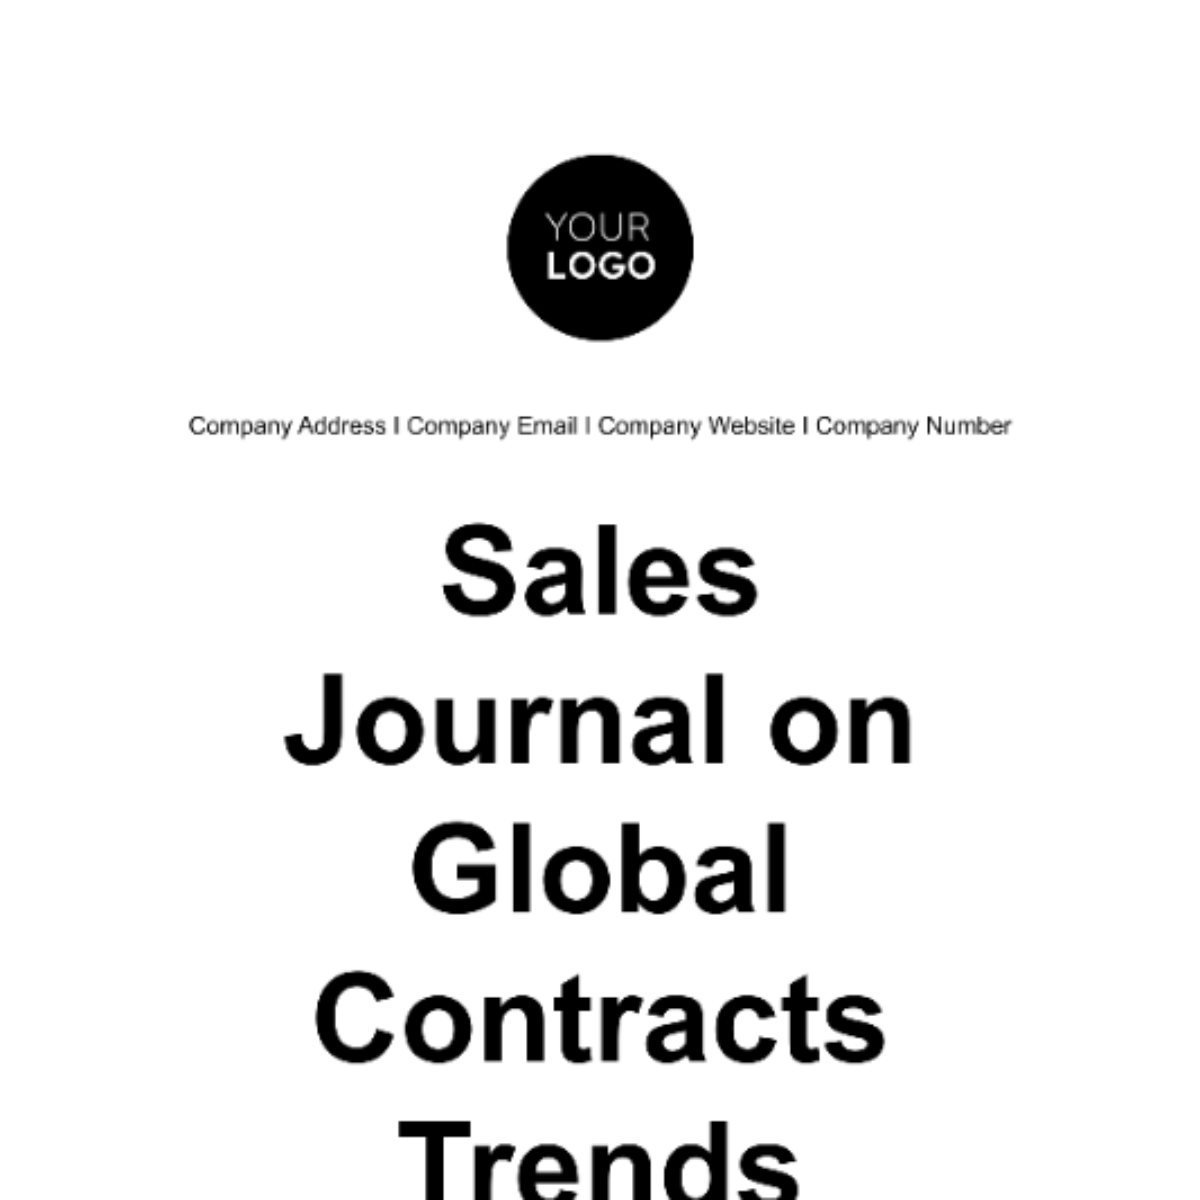 Sales Journal on Global Contracts Trends Template